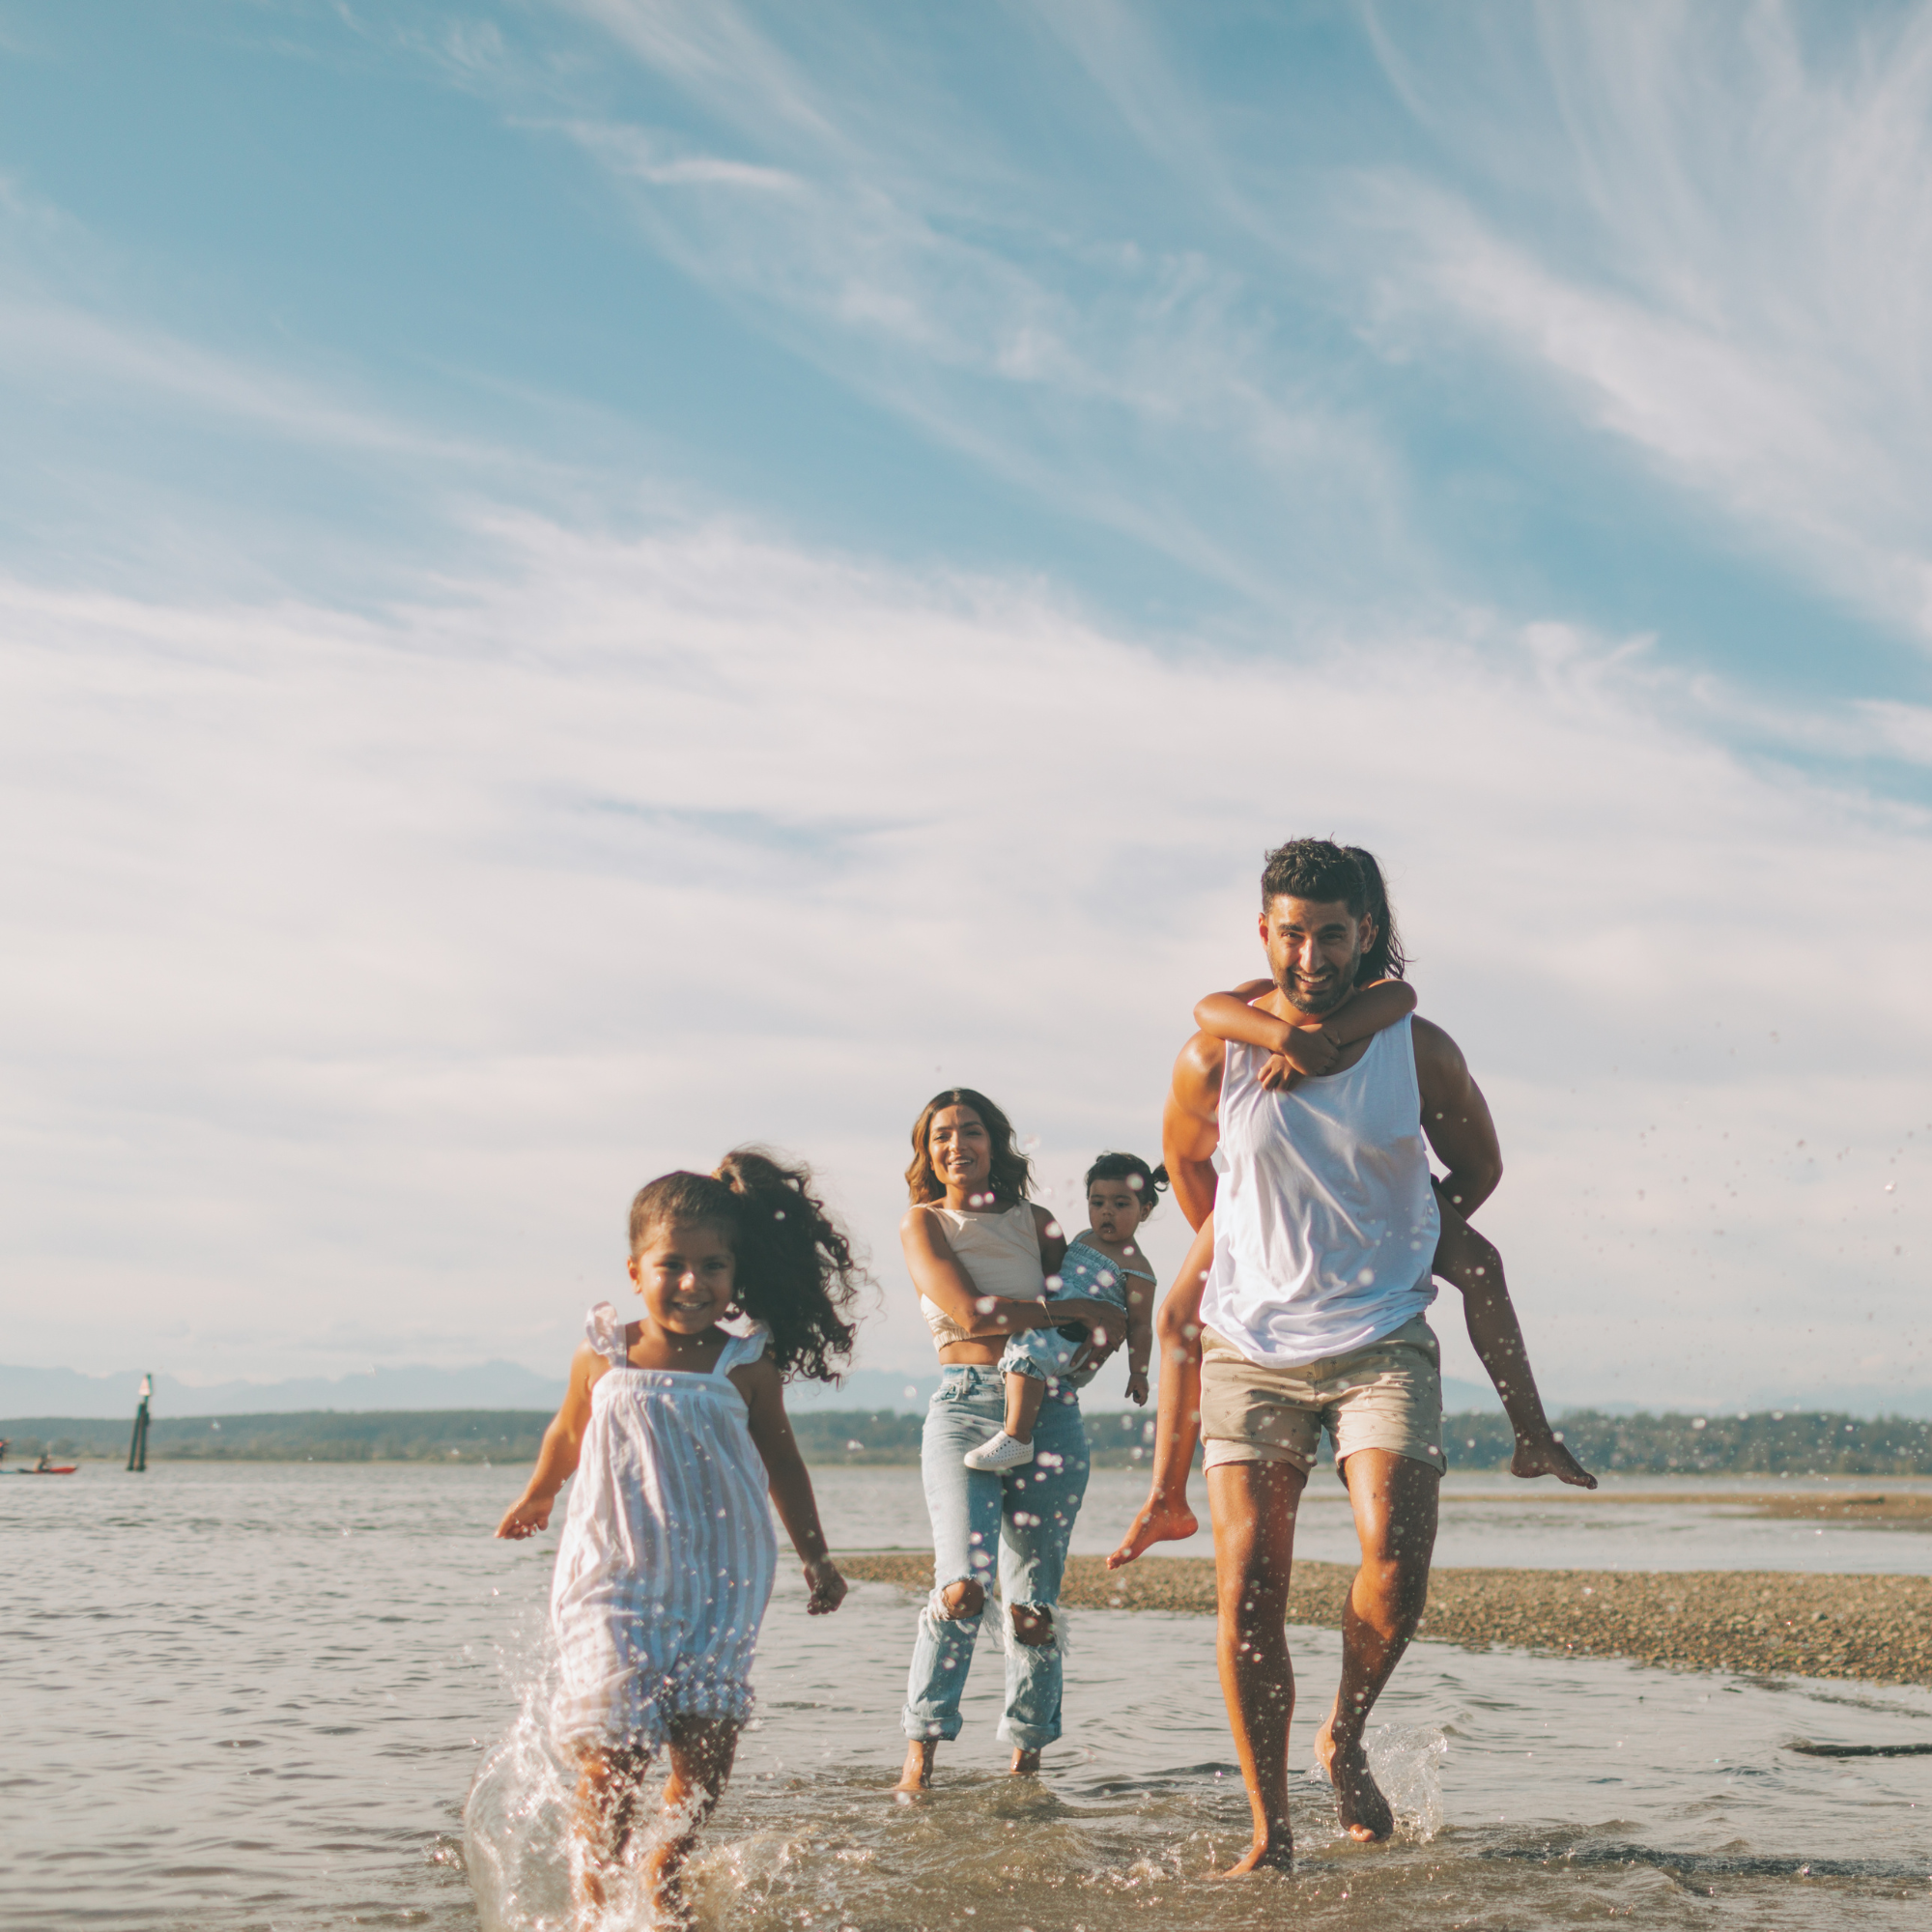 Mum and two daughters splashing in the sea at the beach | Family Holidays | Staycation UK - Clair de Lune UK